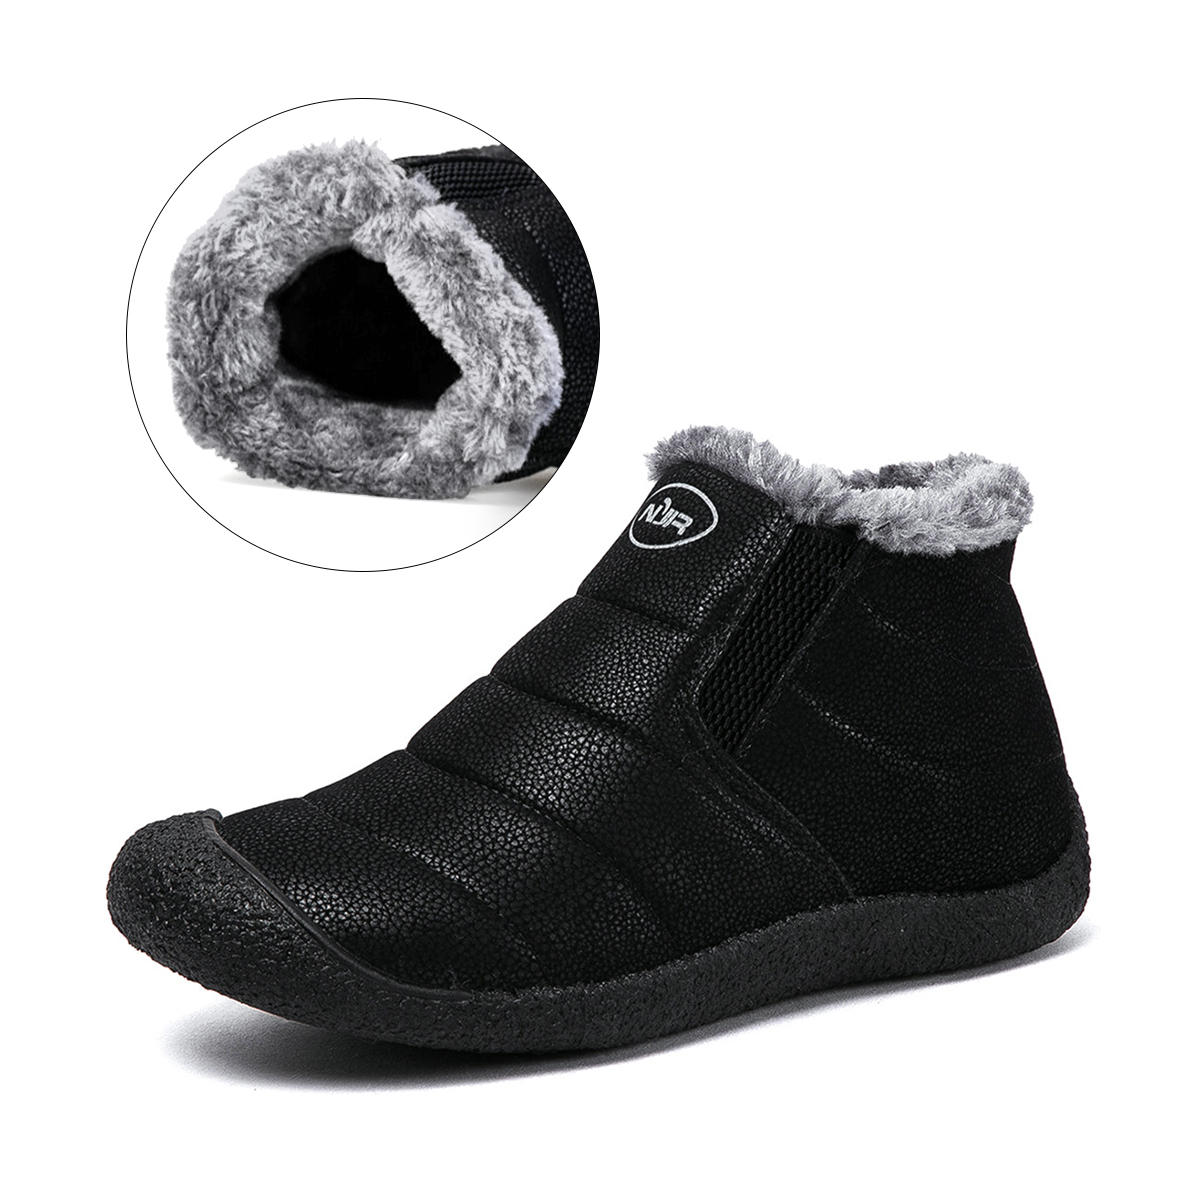 Outdoor Uniex Warm Wool Lining Slip On Flat Ankle Snow Boots Travel Sport Shoes 